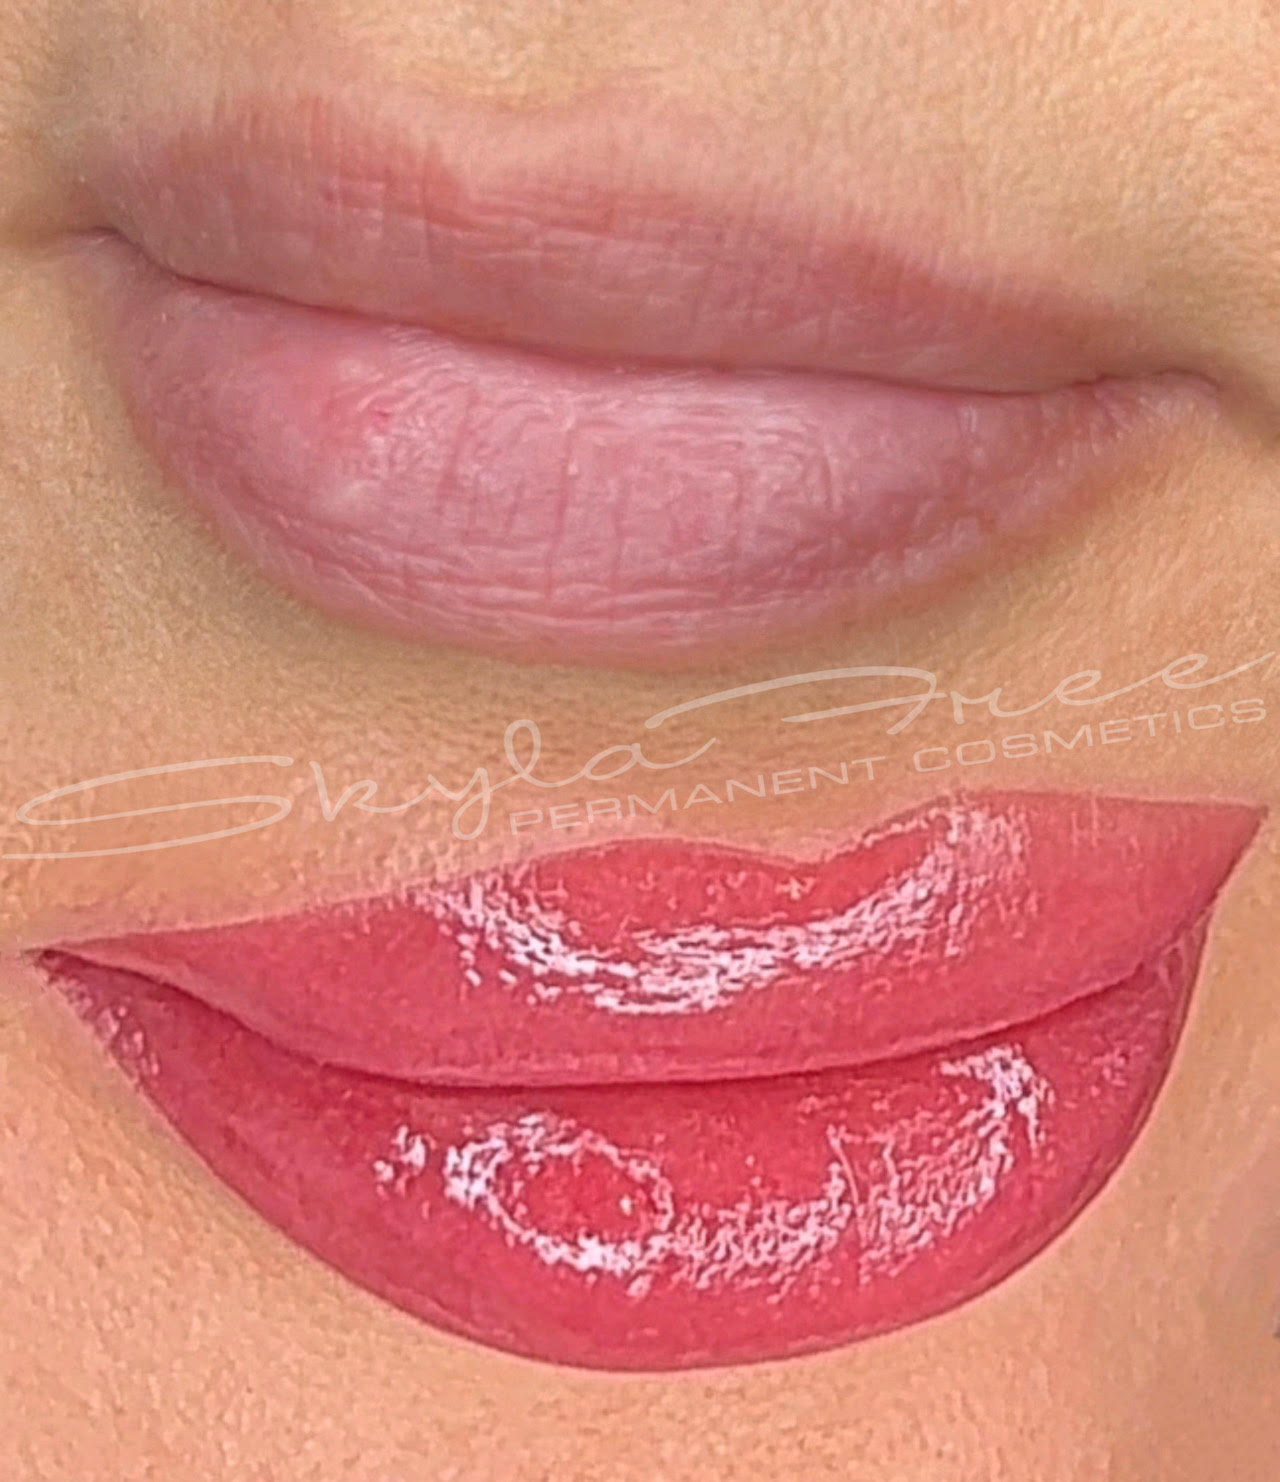 Lip Blushing done by Pretty In Ink